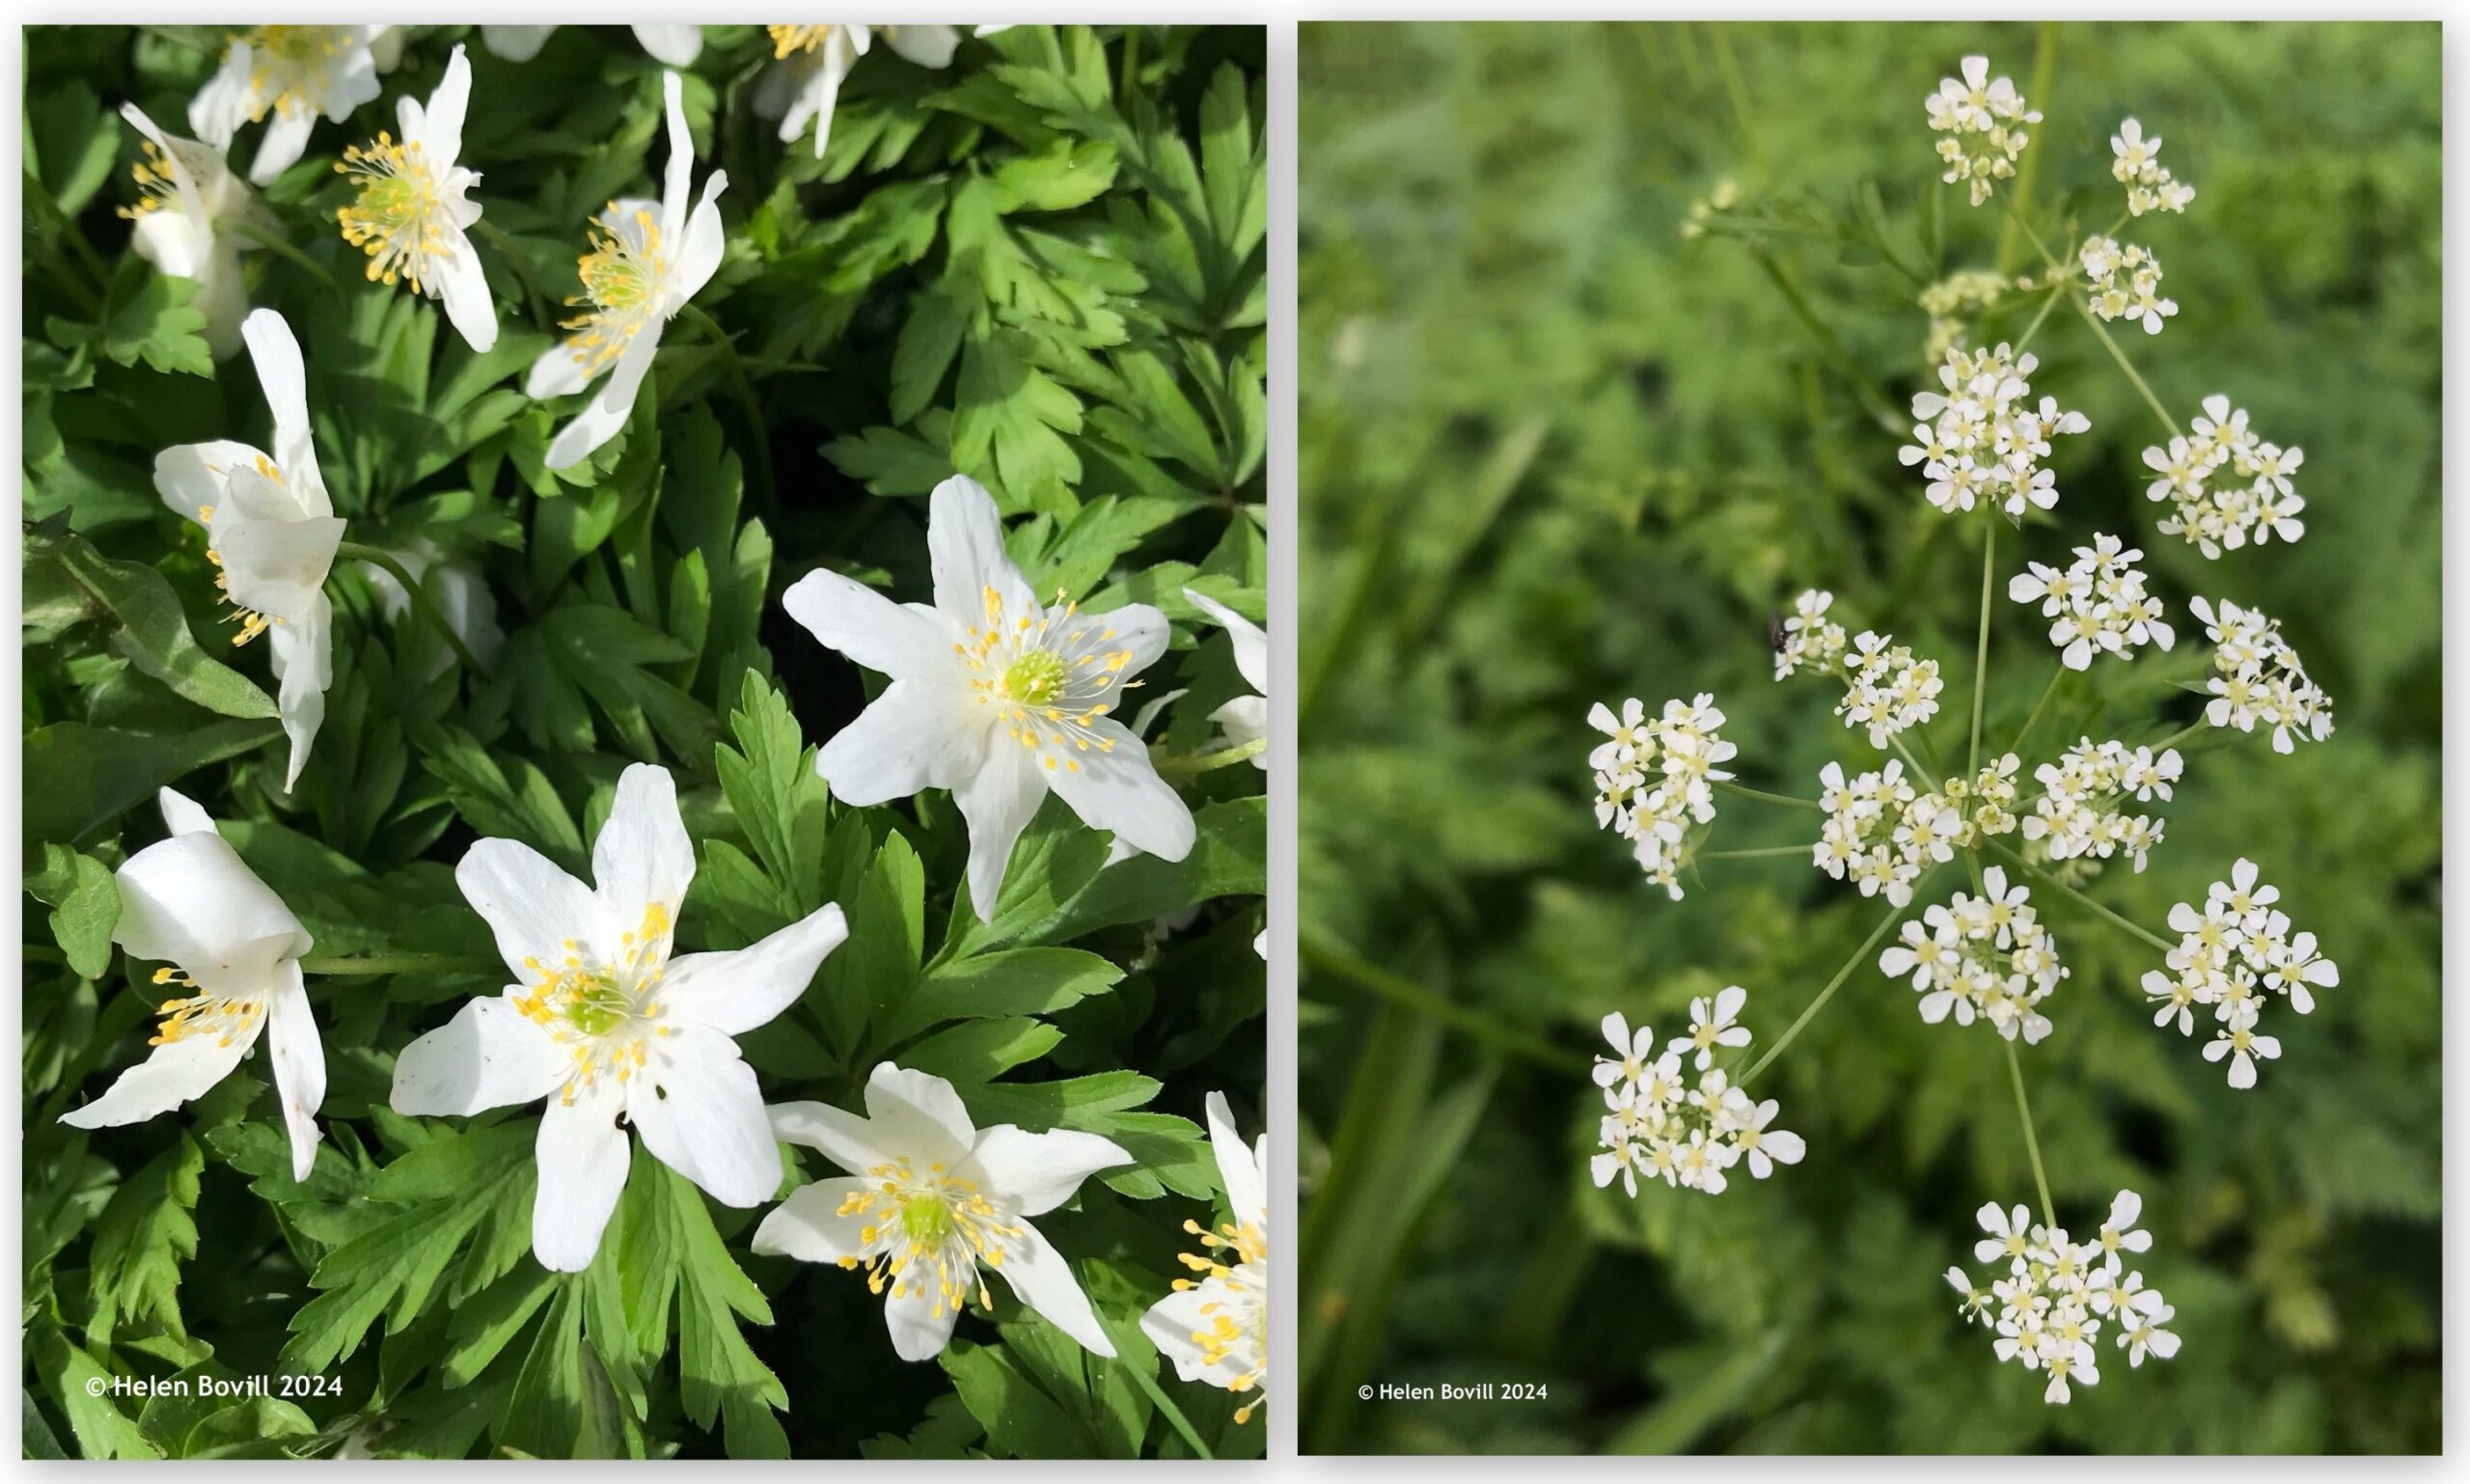 Two photos, one showing Wood Anemones and the other showing Cow Parsley